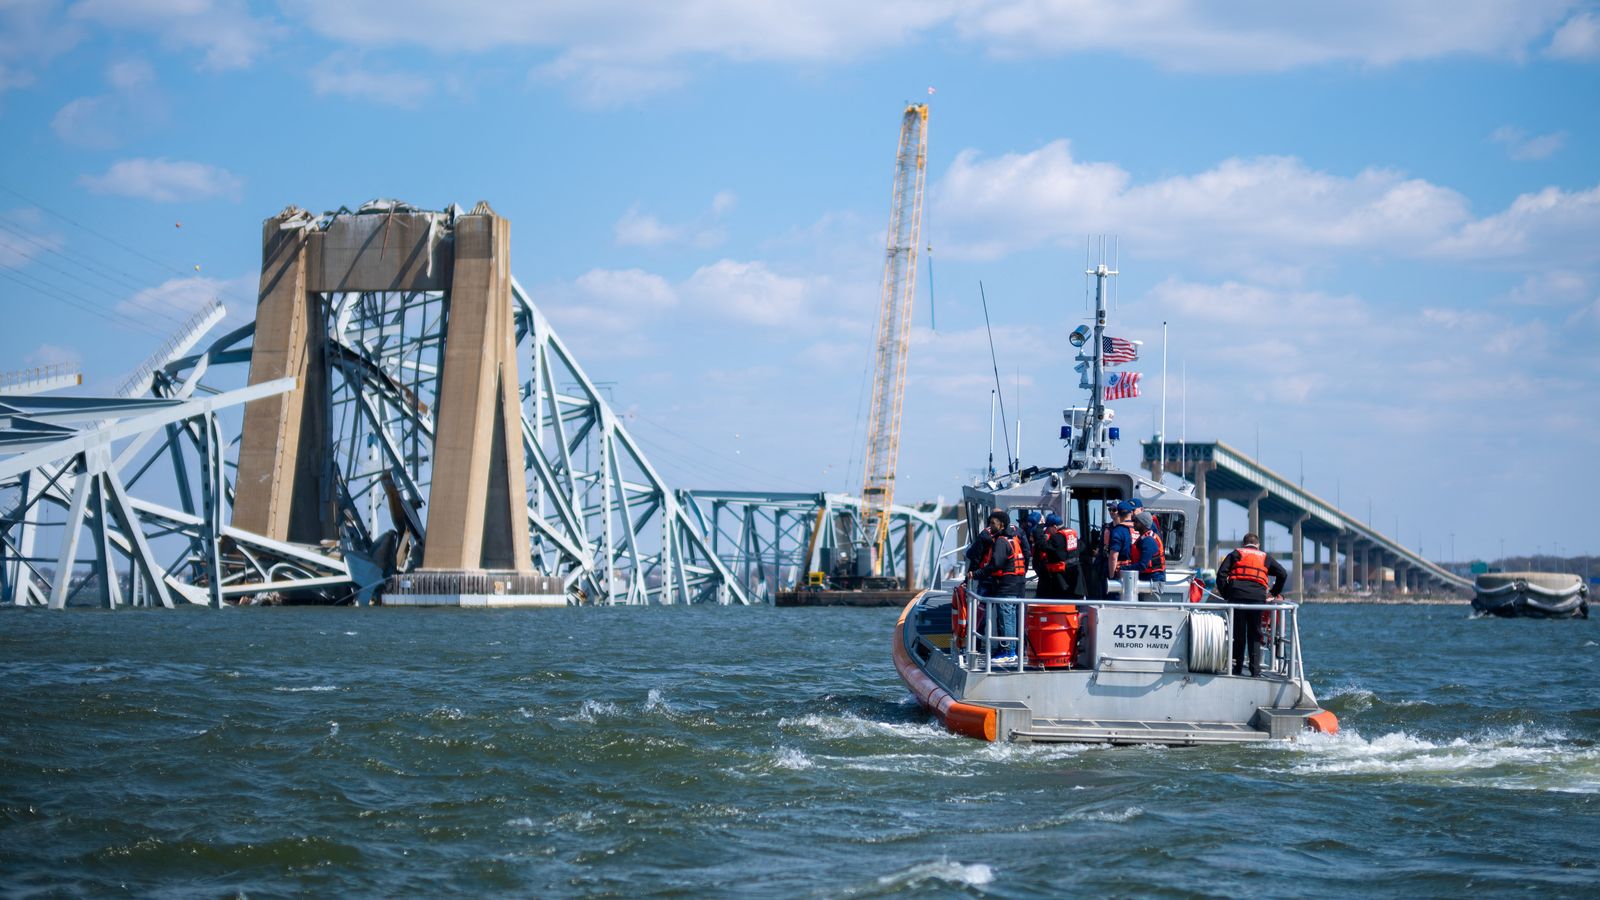 Baltimore bridge collpase: Temporary channel for ships opened to aid clean-up operation after disaster